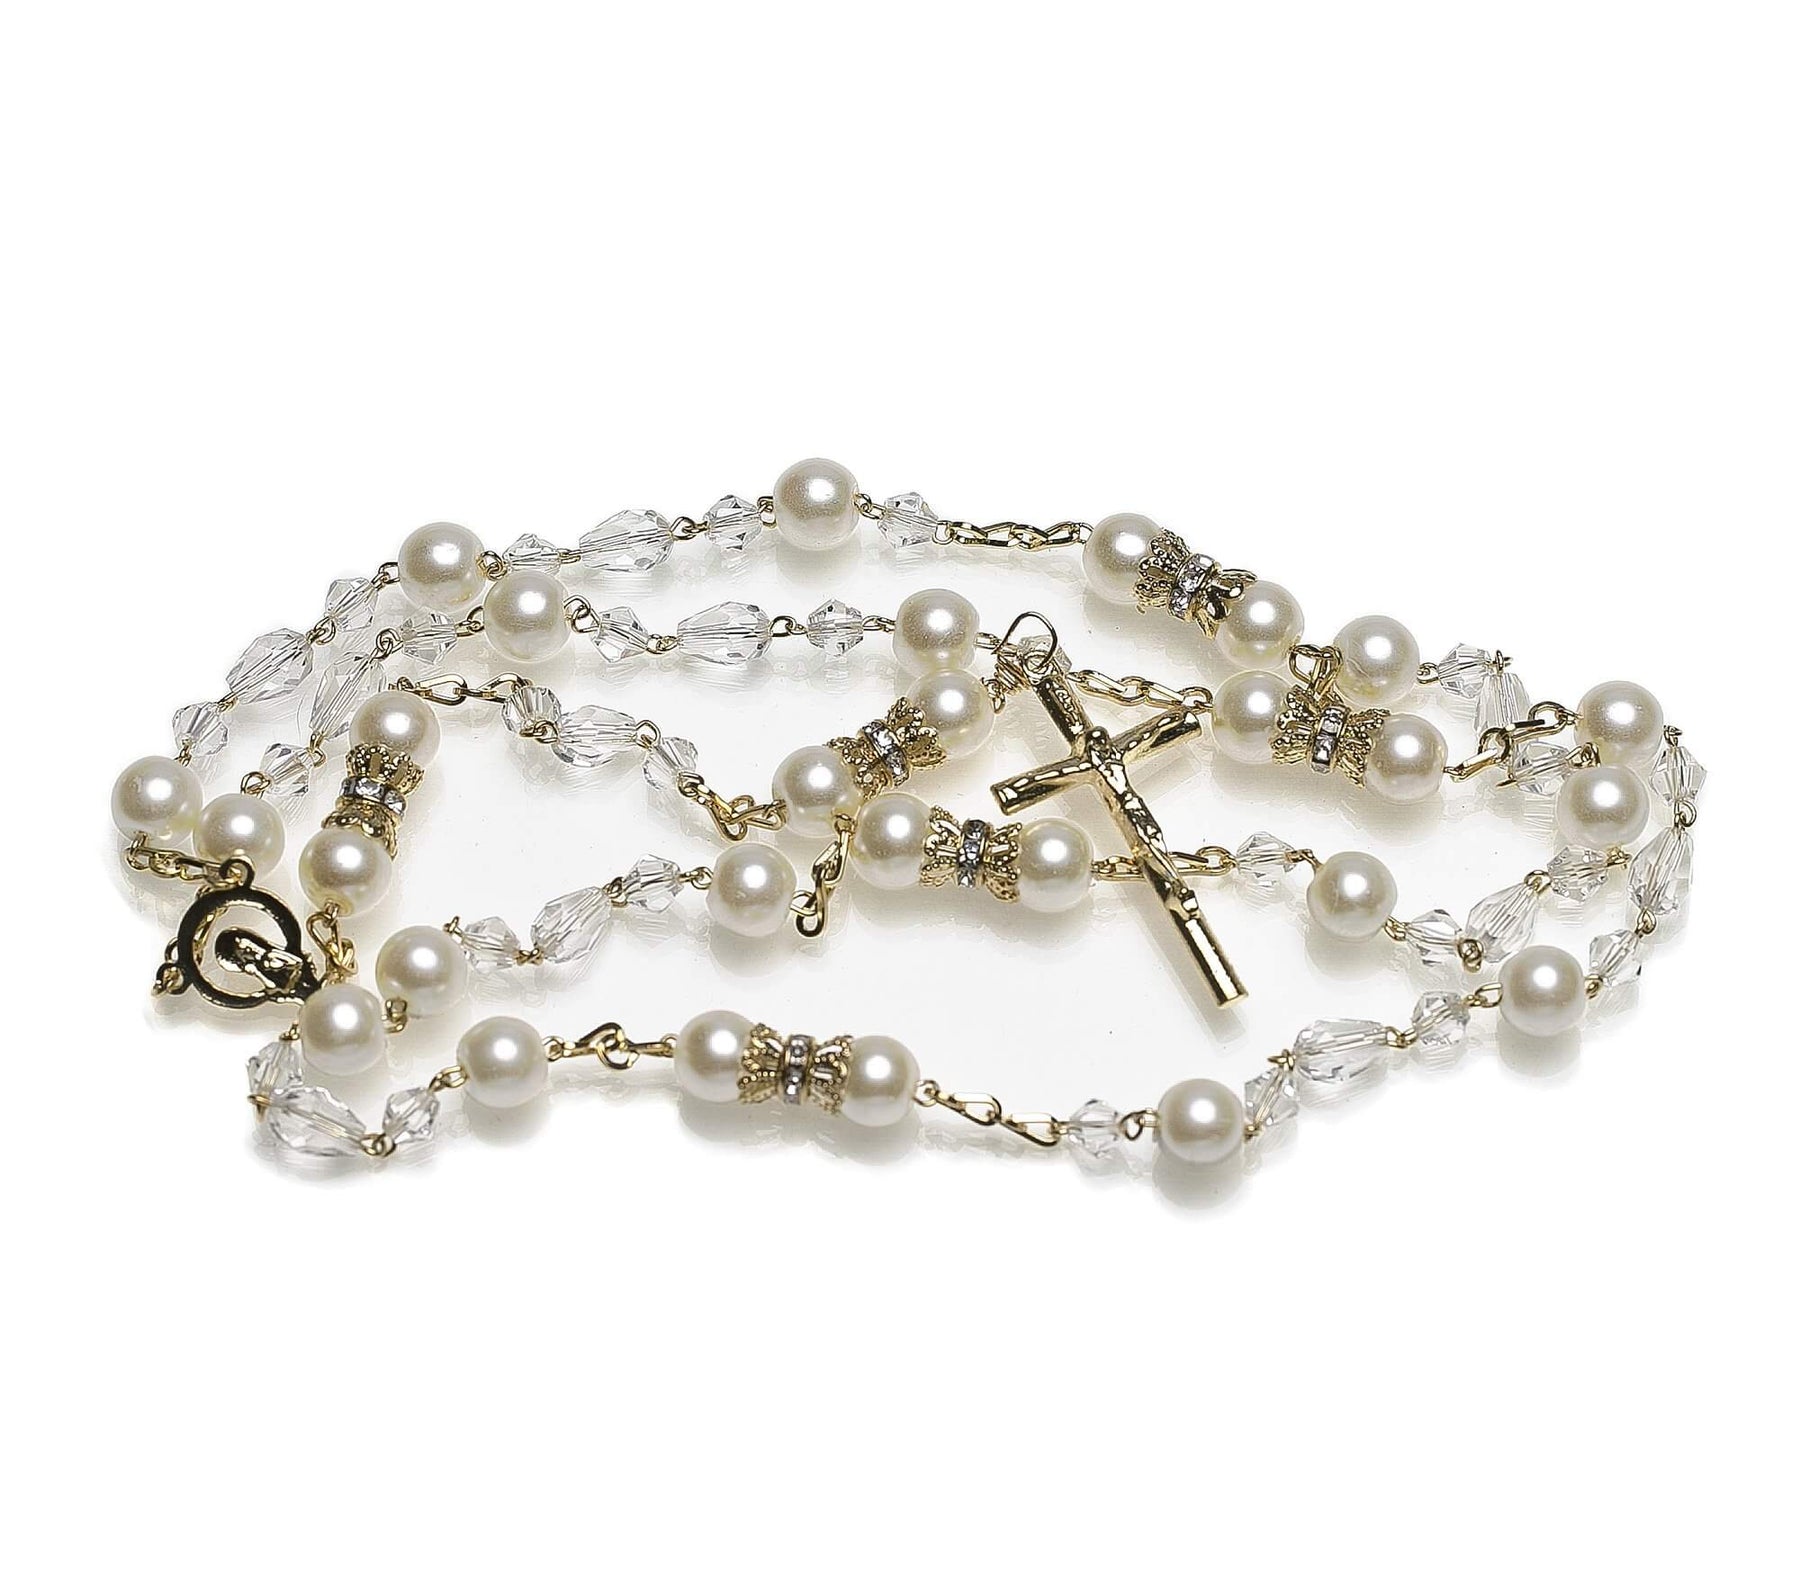 Buy Online: Perfect Handcrafted Pearl Rosary With Clear Crystals!